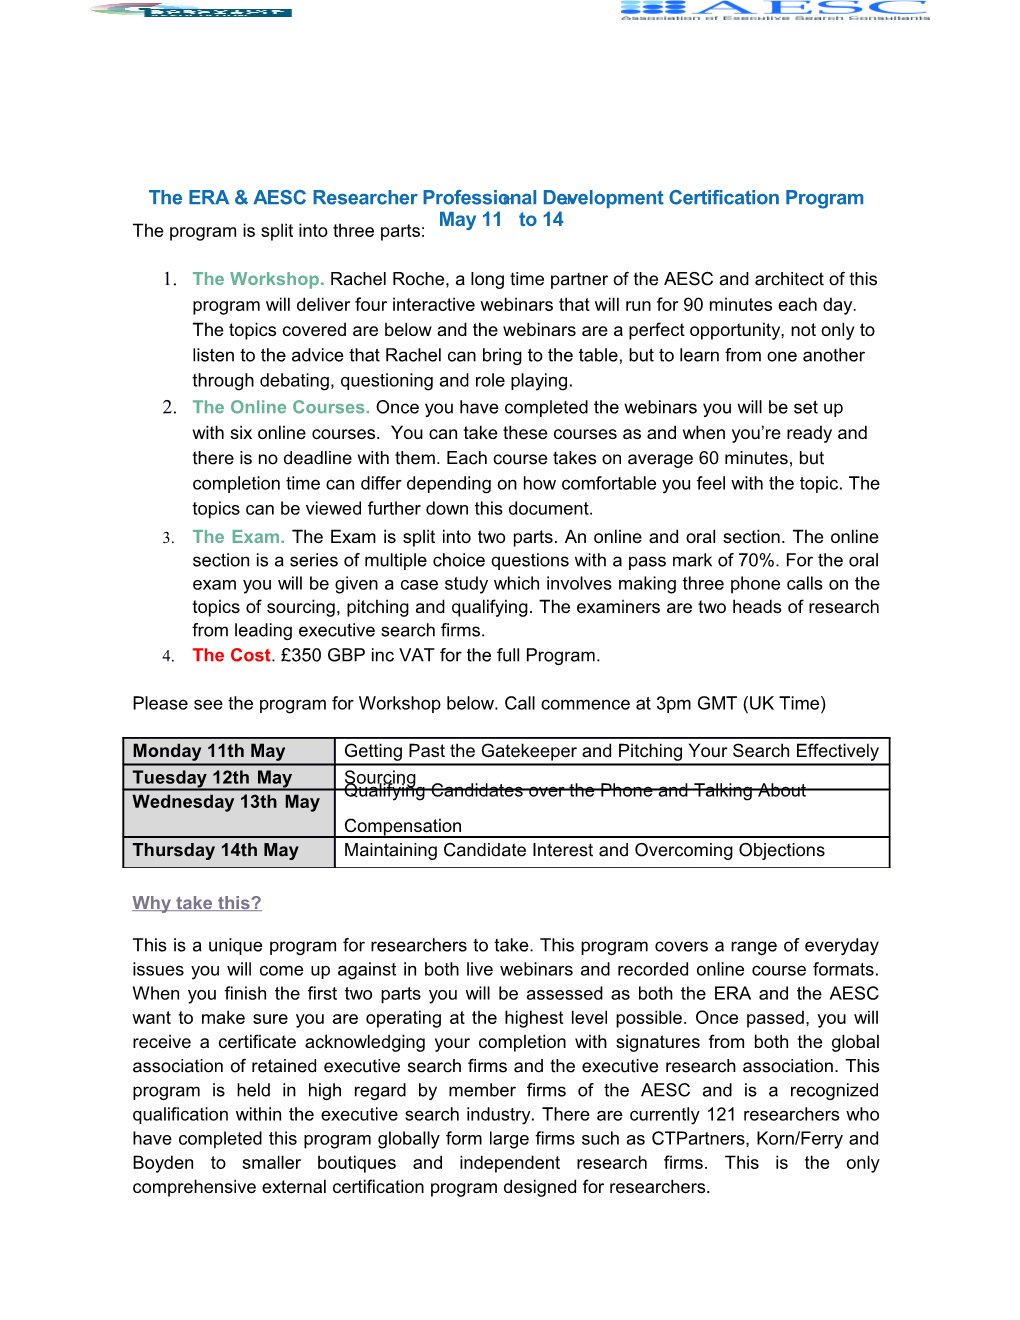 The ERA & AESC Researcher Professional Development Certification Program May 11Th to 14Th